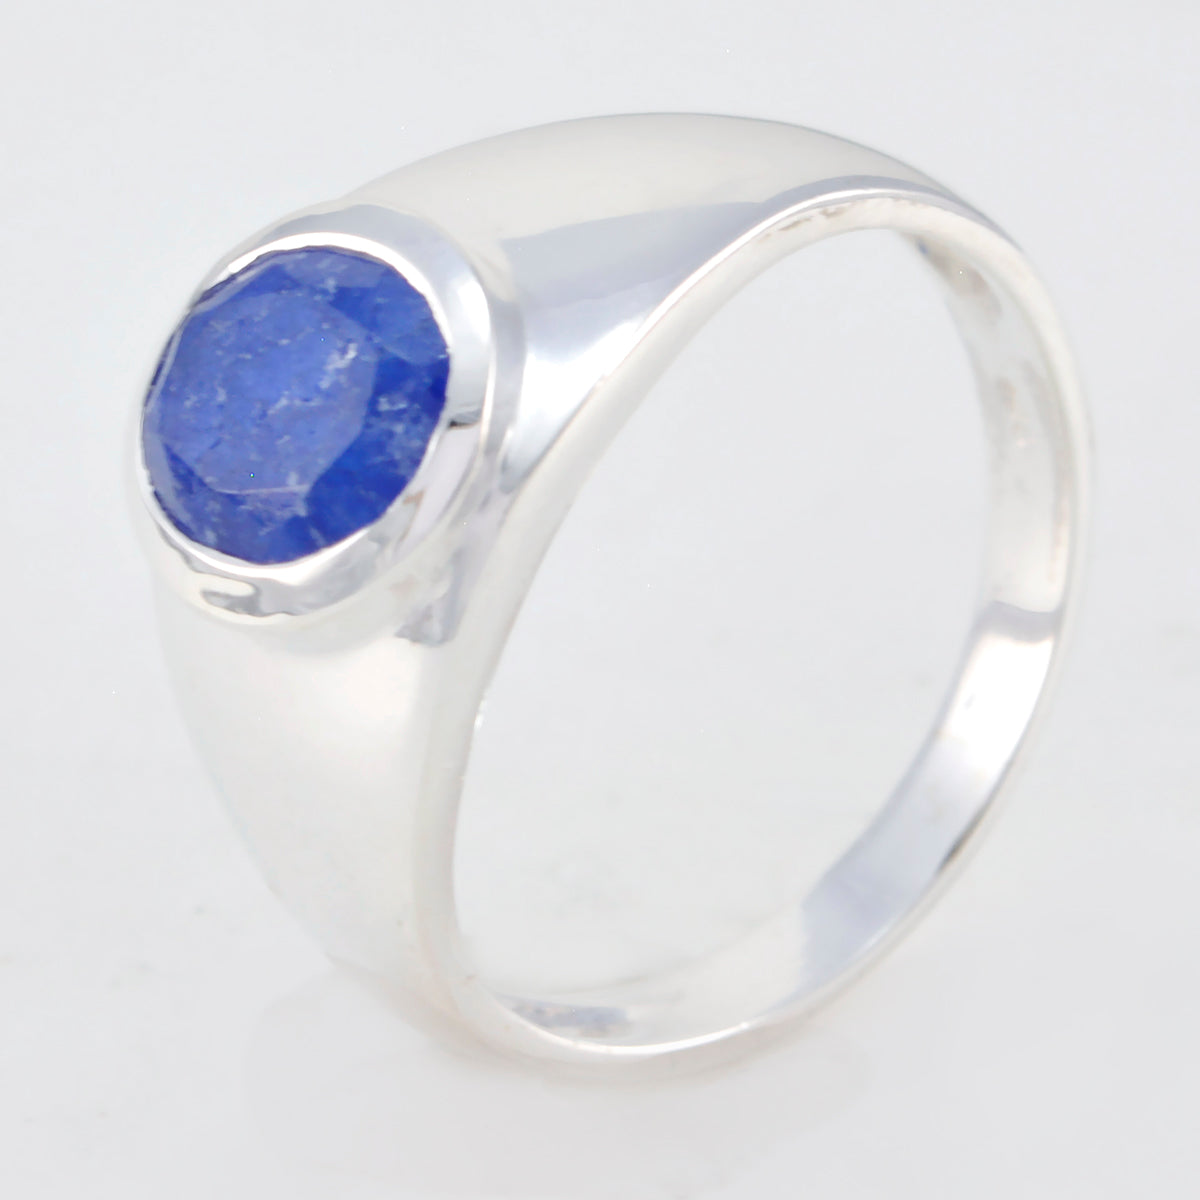 Desirable Gemstone Indiansapphire Silver Ring Jewelry Stores Online